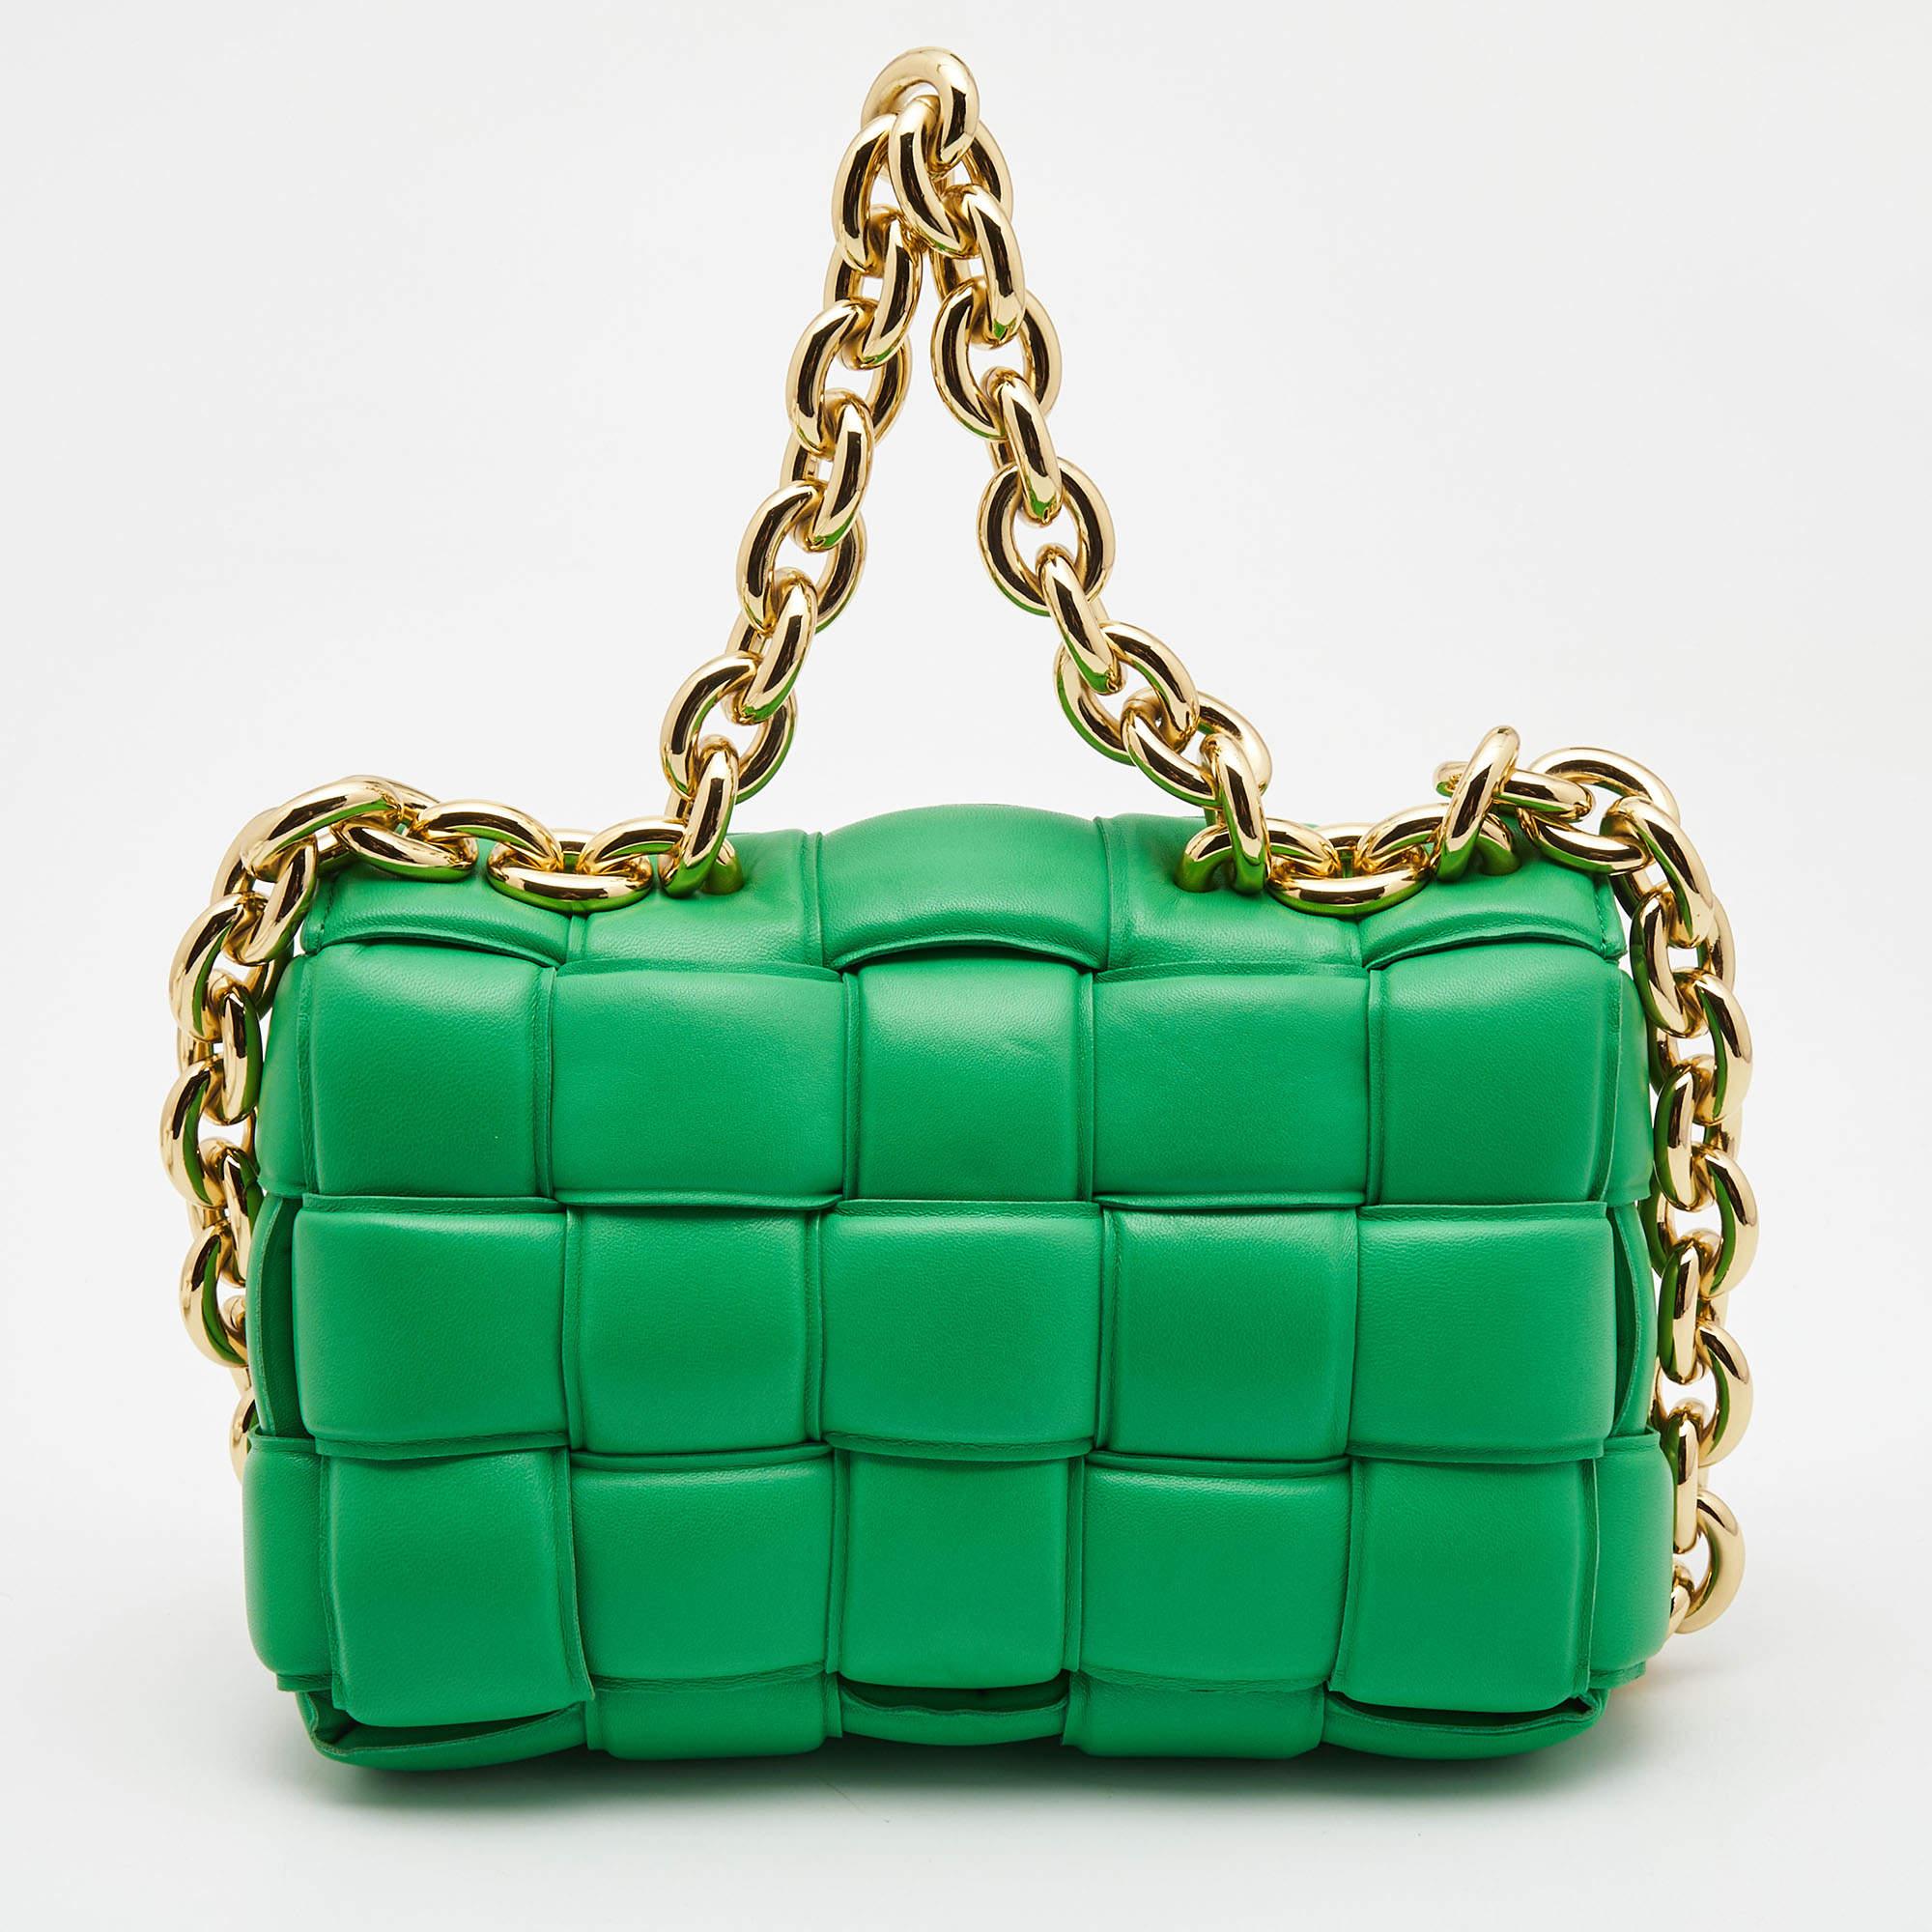 The Bottega Veneta Cassette shoulder bag is a luxurious accessory featuring exquisite padded green leather. It boasts a chic, rectangular silhouette with a chunky chain strap, adding a touch of edgy elegance. This bag is both stylish and functional,